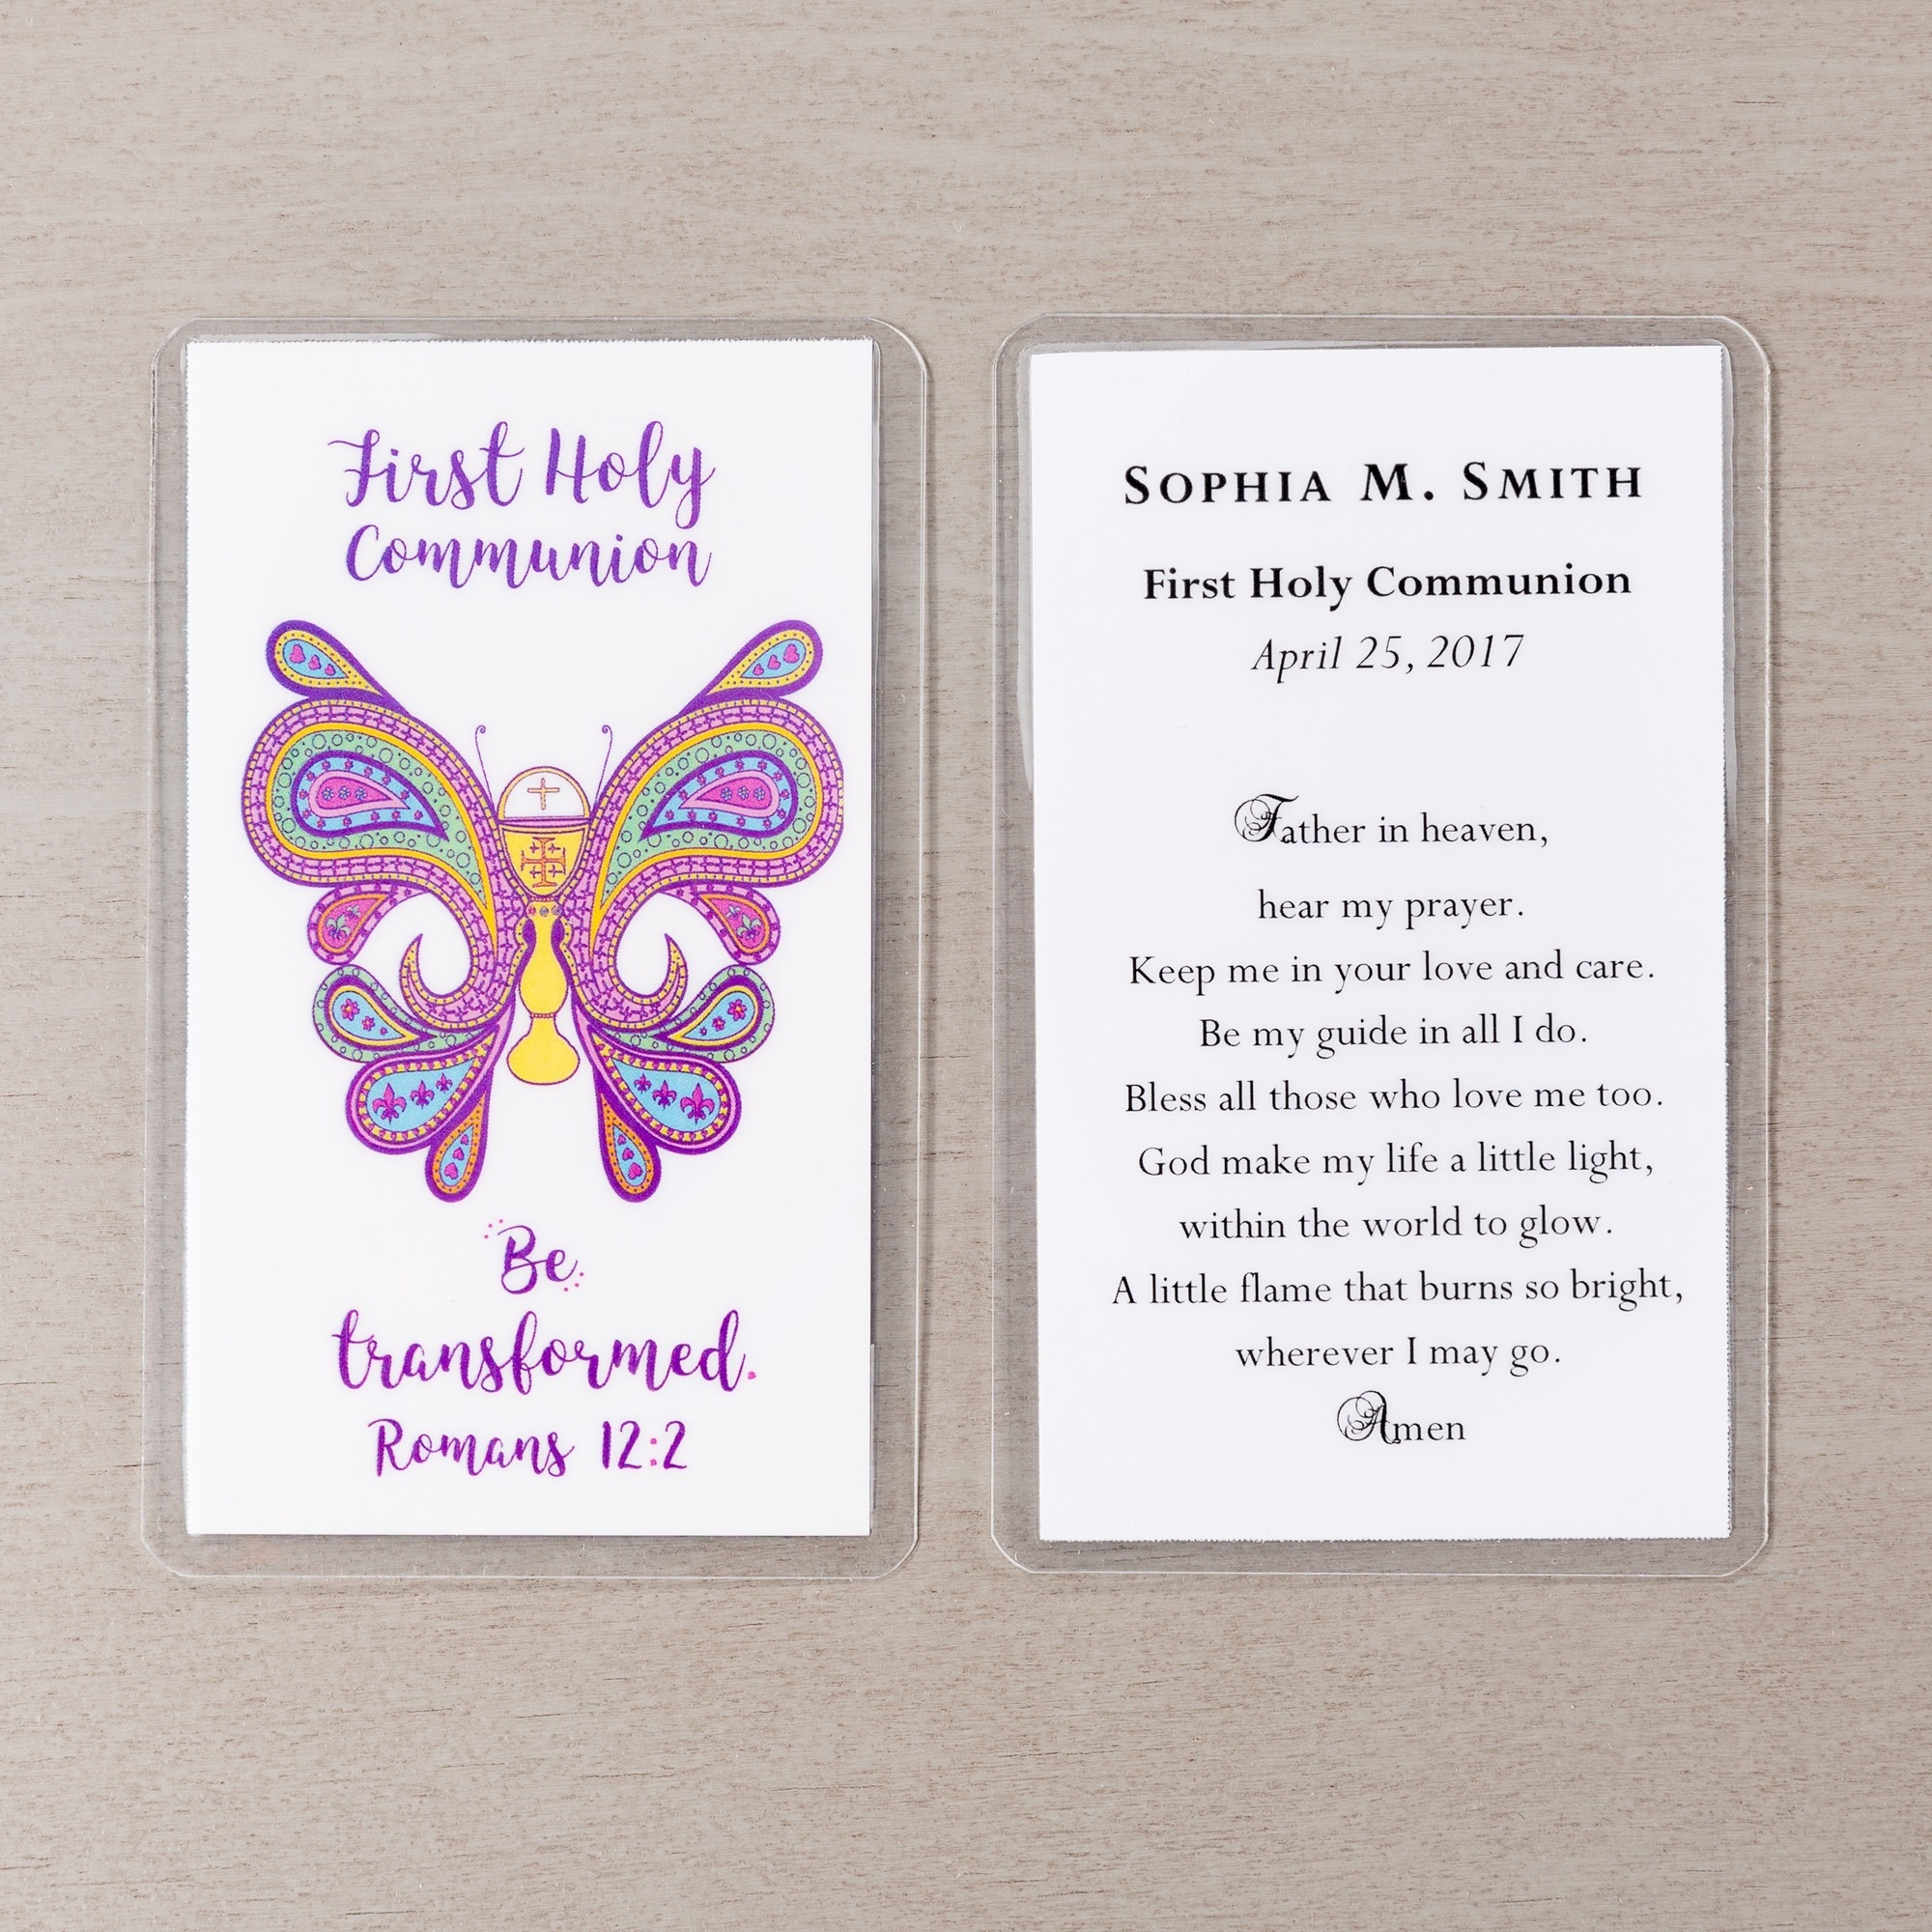 First Communion Cards | The Catholic Company - First Holy Communion Cards Printable Free